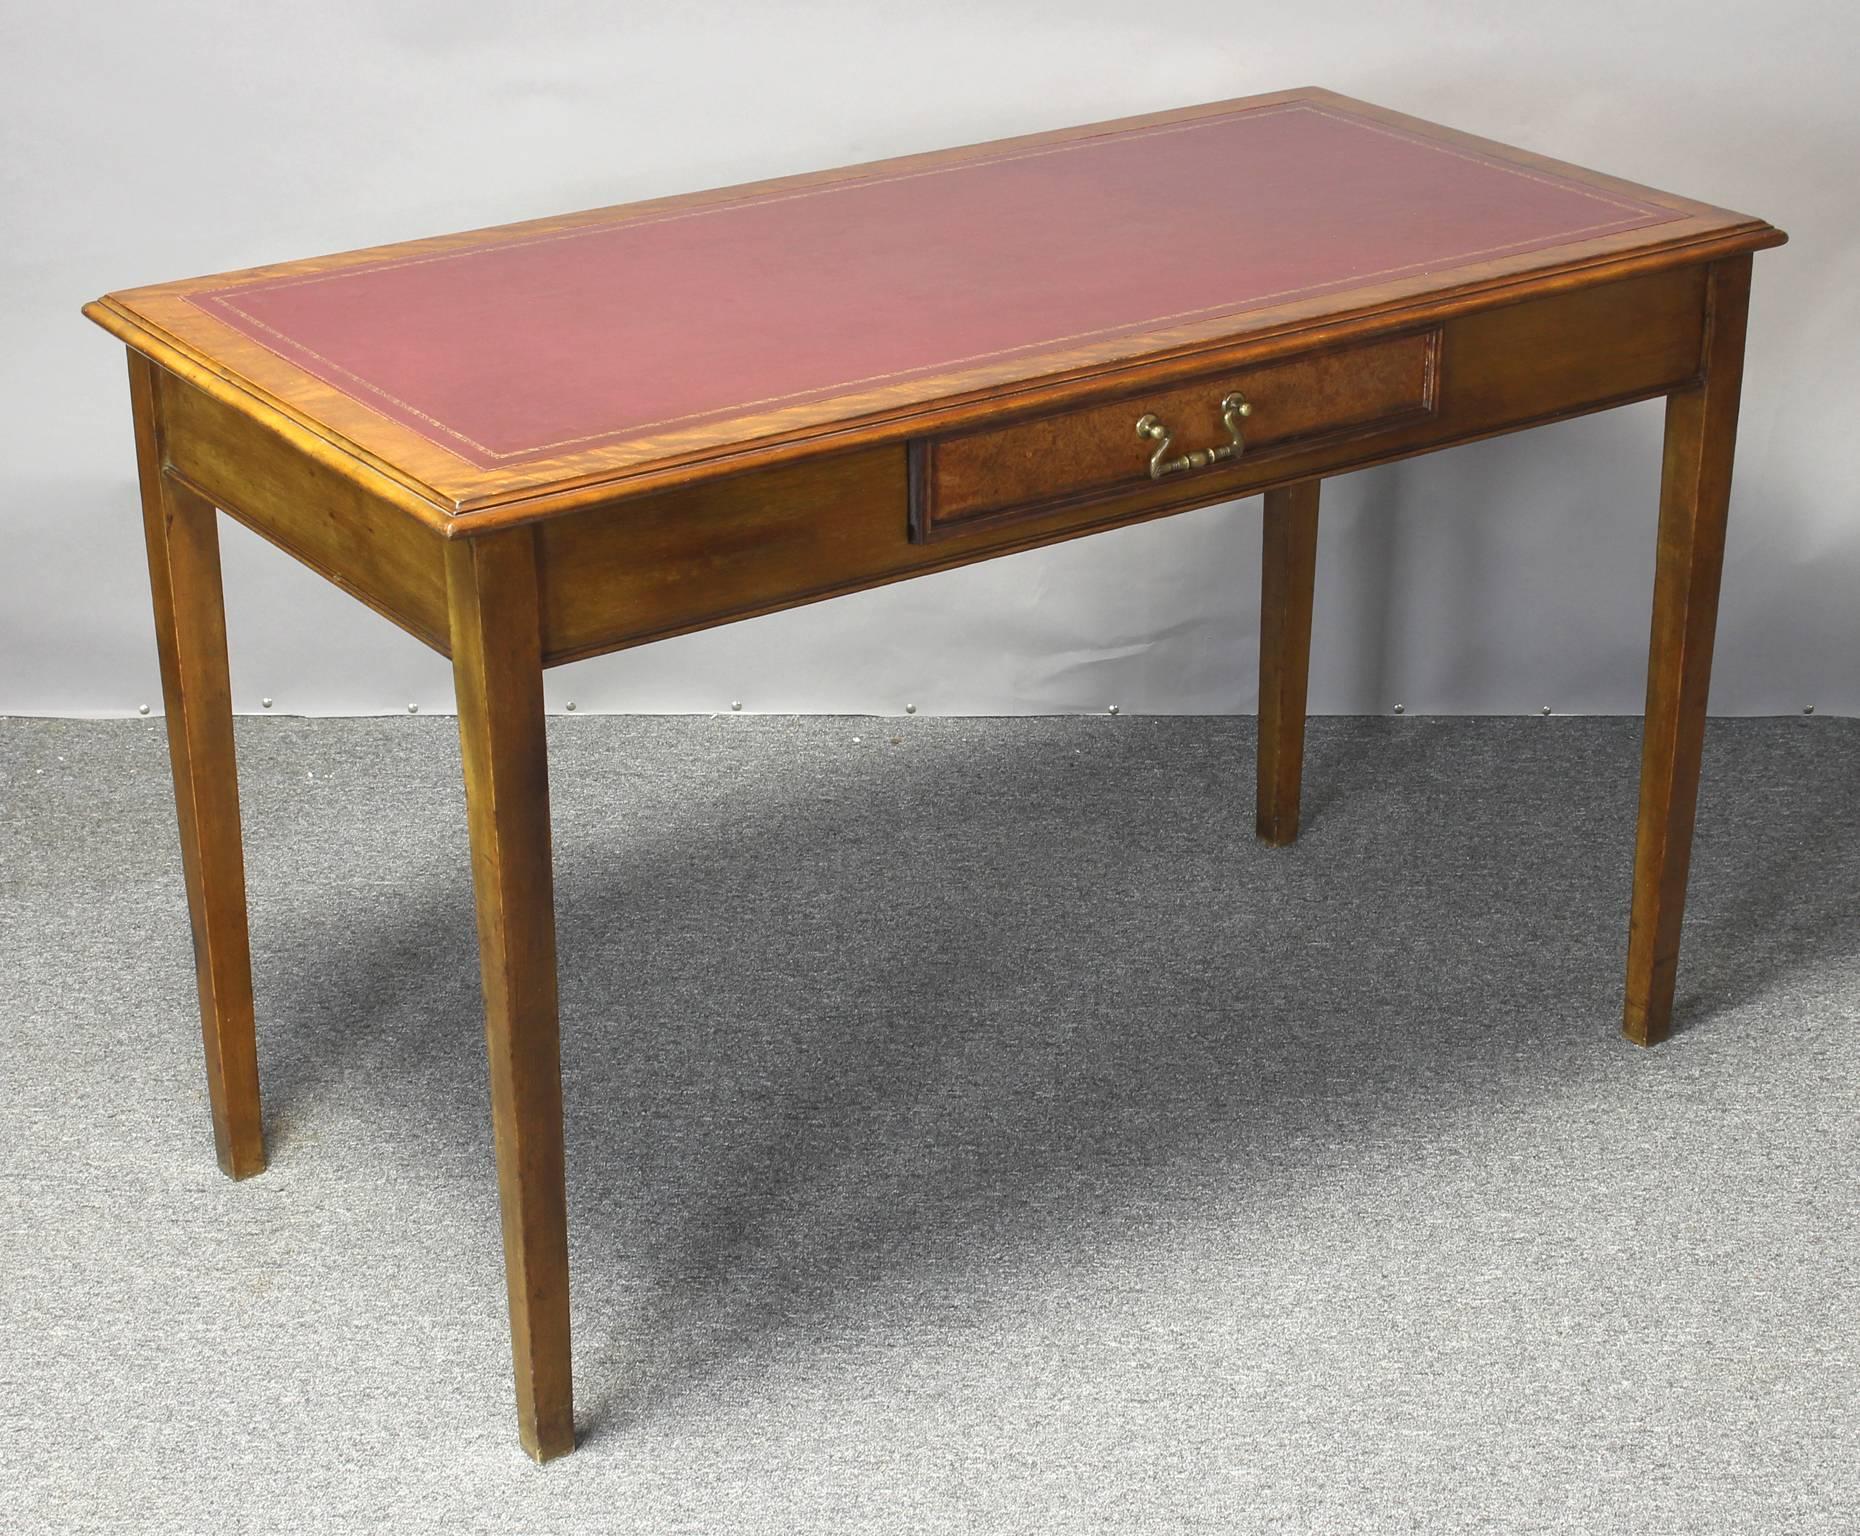 A simple and elegant late 19th century English Edwardian writing table with inset red leather top above a single drawer resting on square tapering legs.